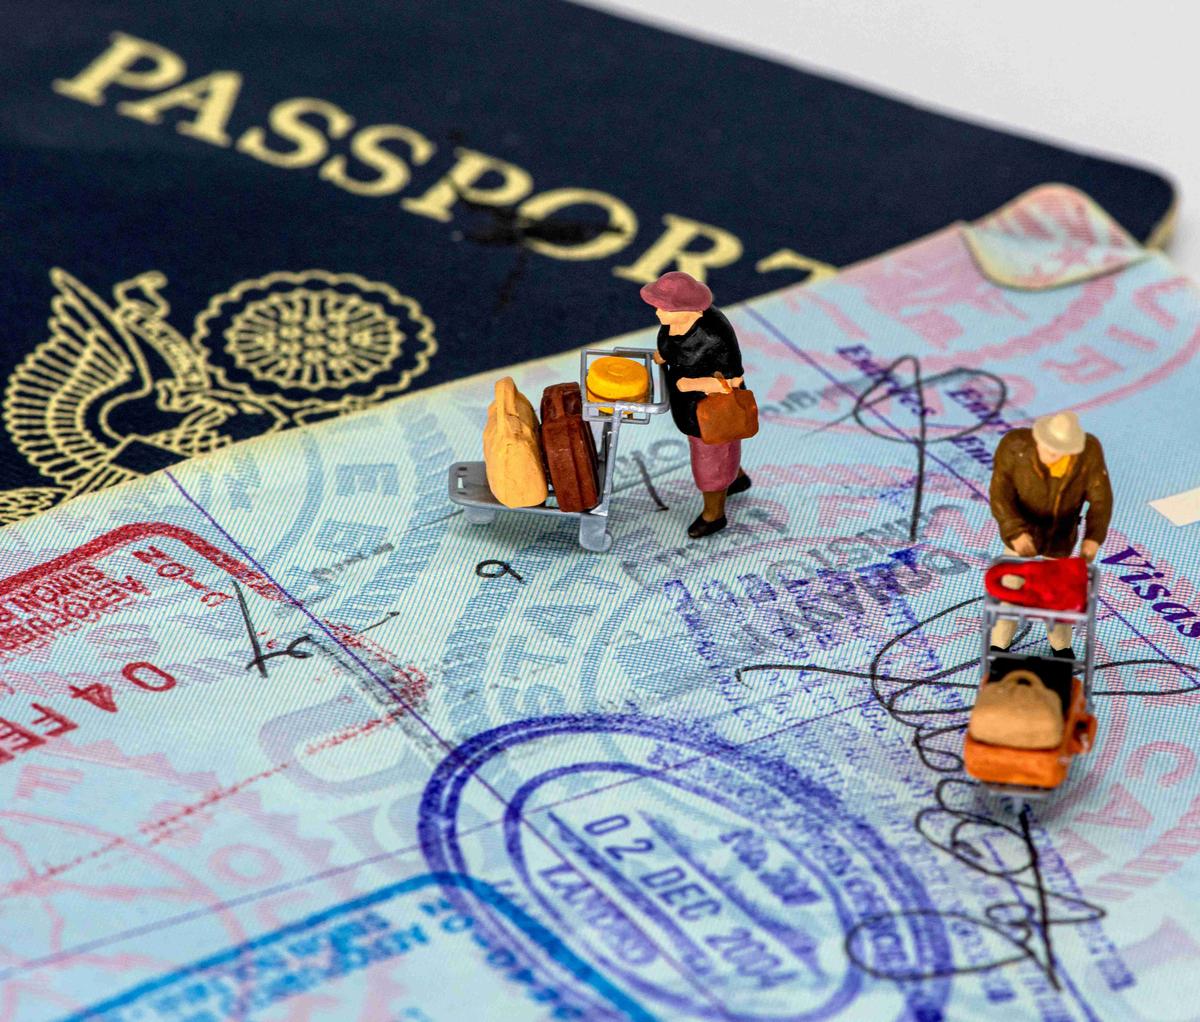 Miniature Figures on Passport with Travel Stamps